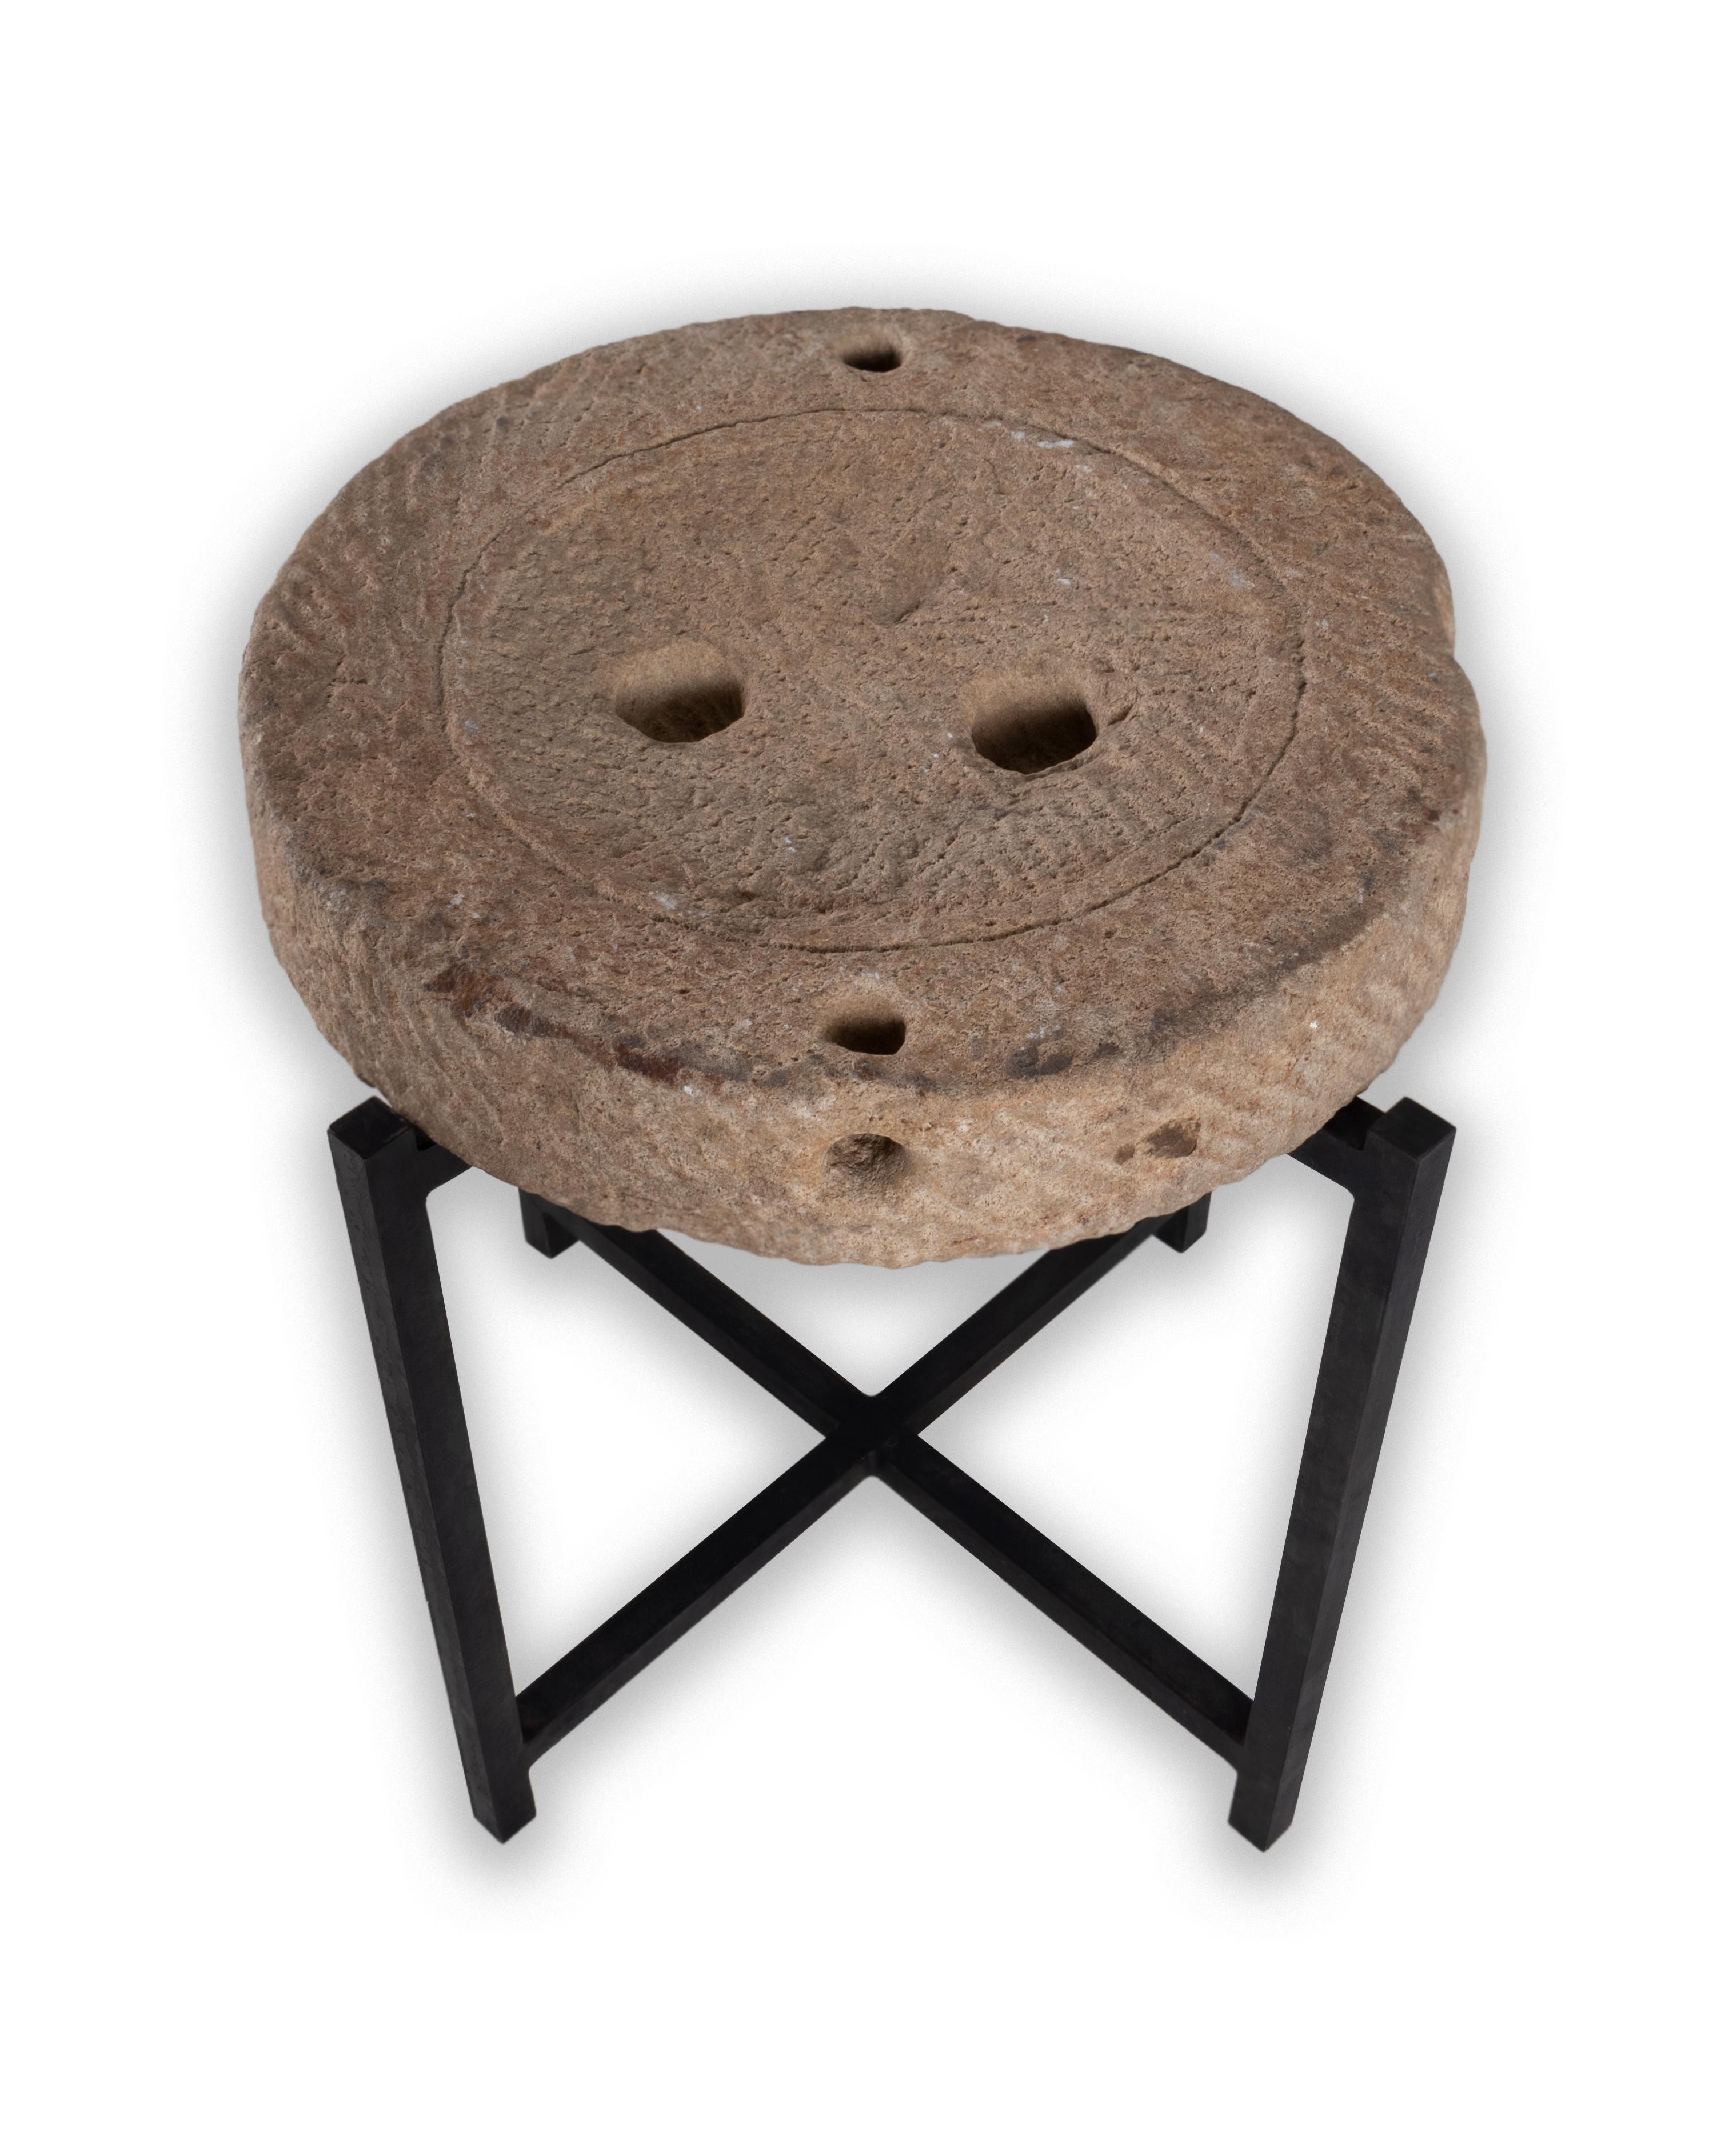 Limestone Mill wheel on stand.

This piece is a part of Brendan Bass’s one-of-a-kind collection, Le Monde. French for “The World”, the Le Monde collection is made up of rare and hard to find pieces curated by Brendan from estate sales, brocantes,